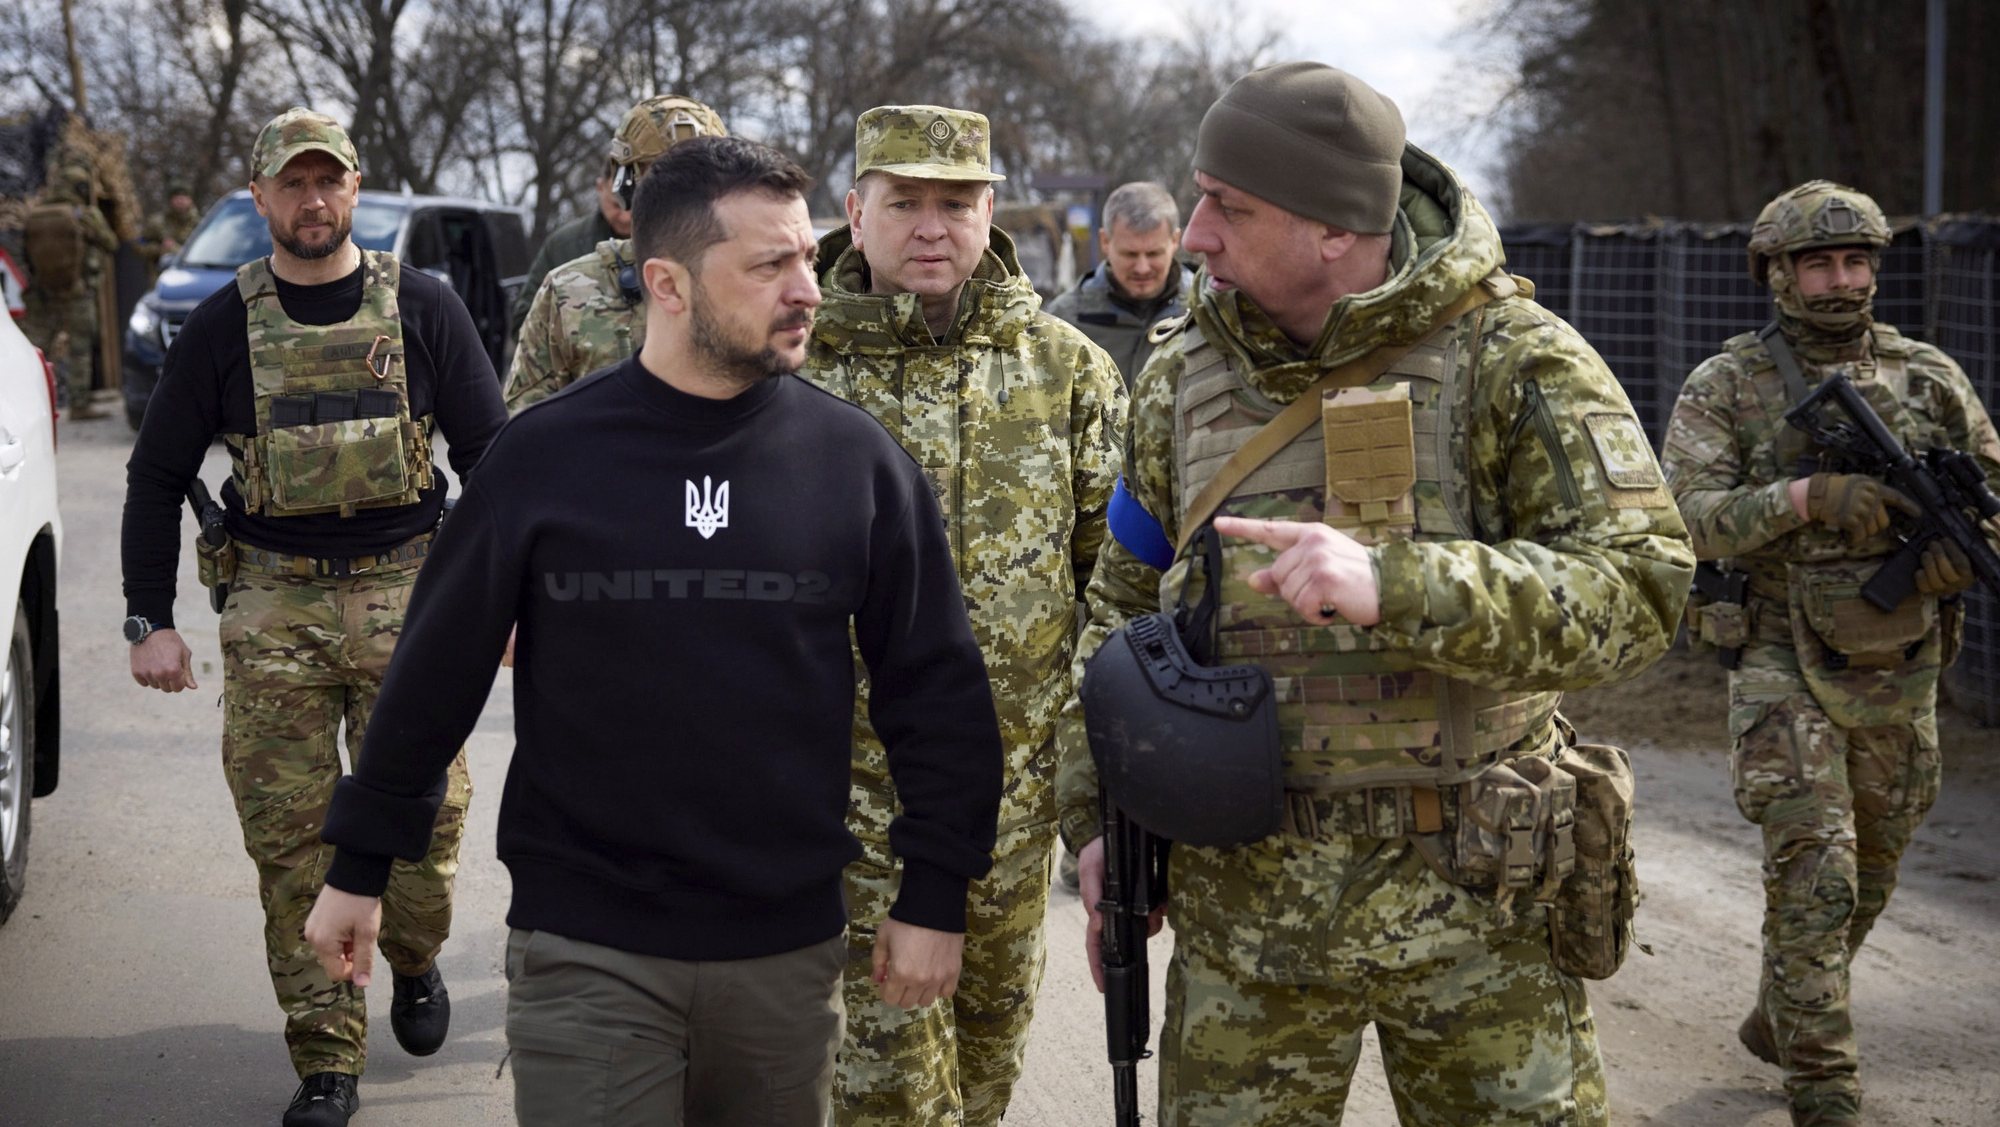 epa10547201 A handout photo made available by the Ukrainian Presidential Press Service shows Ukrainian President Volodymyr Zelensky (L) walking at an undisclosed position of Ukrainian frontier guards in the Sumy area, Ukraine, 28 March 2023. Zelensky inspected the units of the State Border Guard Service during his working visit to the border area with Russia. Russian troops on 24 February 2022, entered Ukrainian territory, starting a conflict that has provoked destruction and a humanitarian crisis.  EPA/PRESIDENTIAL PRESS SERVICE HANDOUT  HANDOUT EDITORIAL USE ONLY/NO SALES